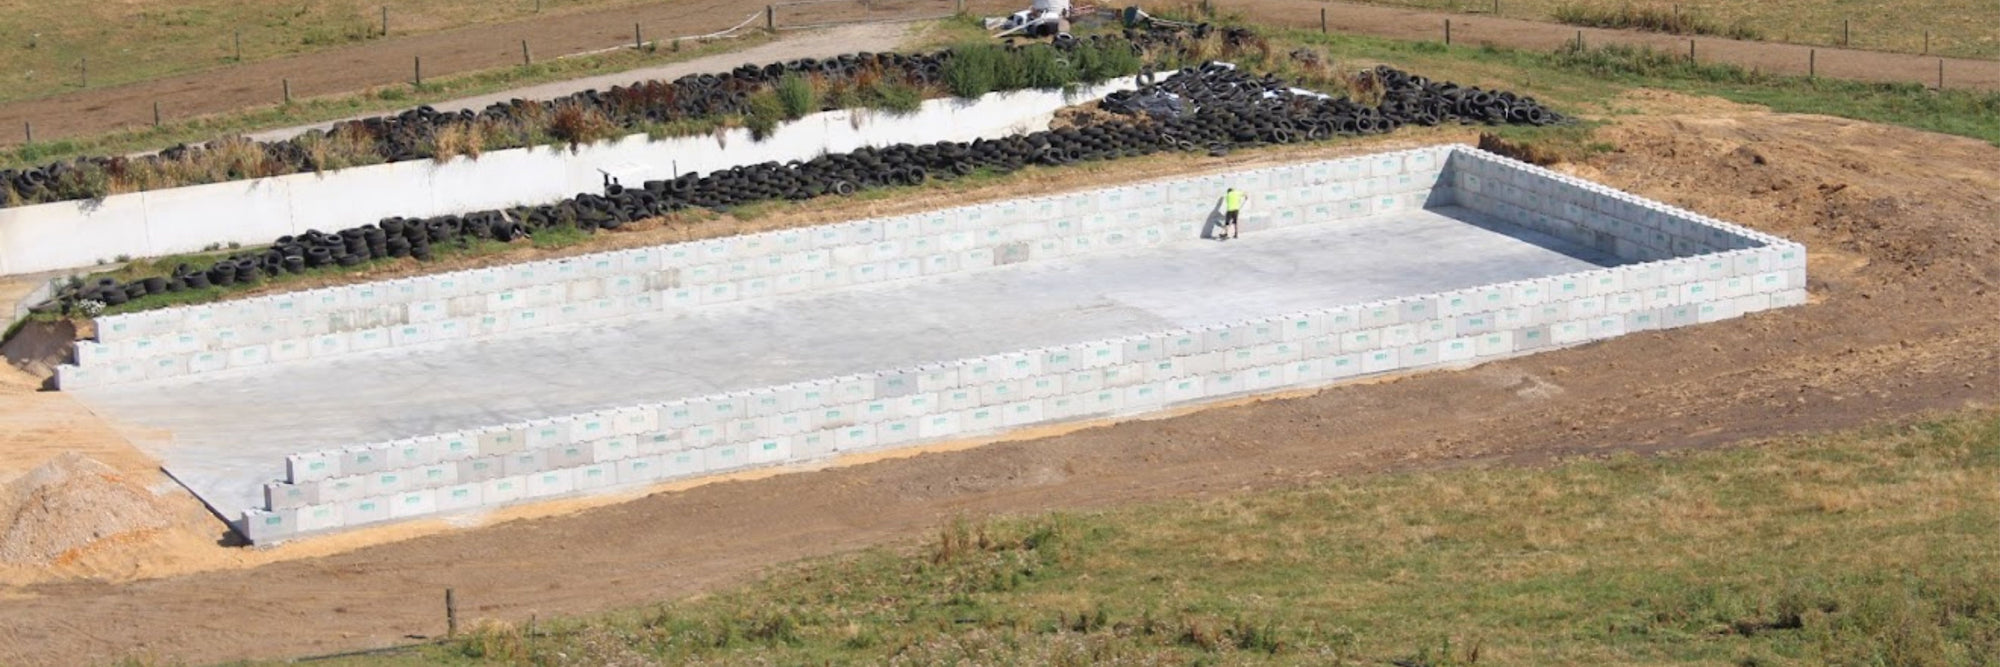 Large Interbloc silage bunker with a man sweeping the bay